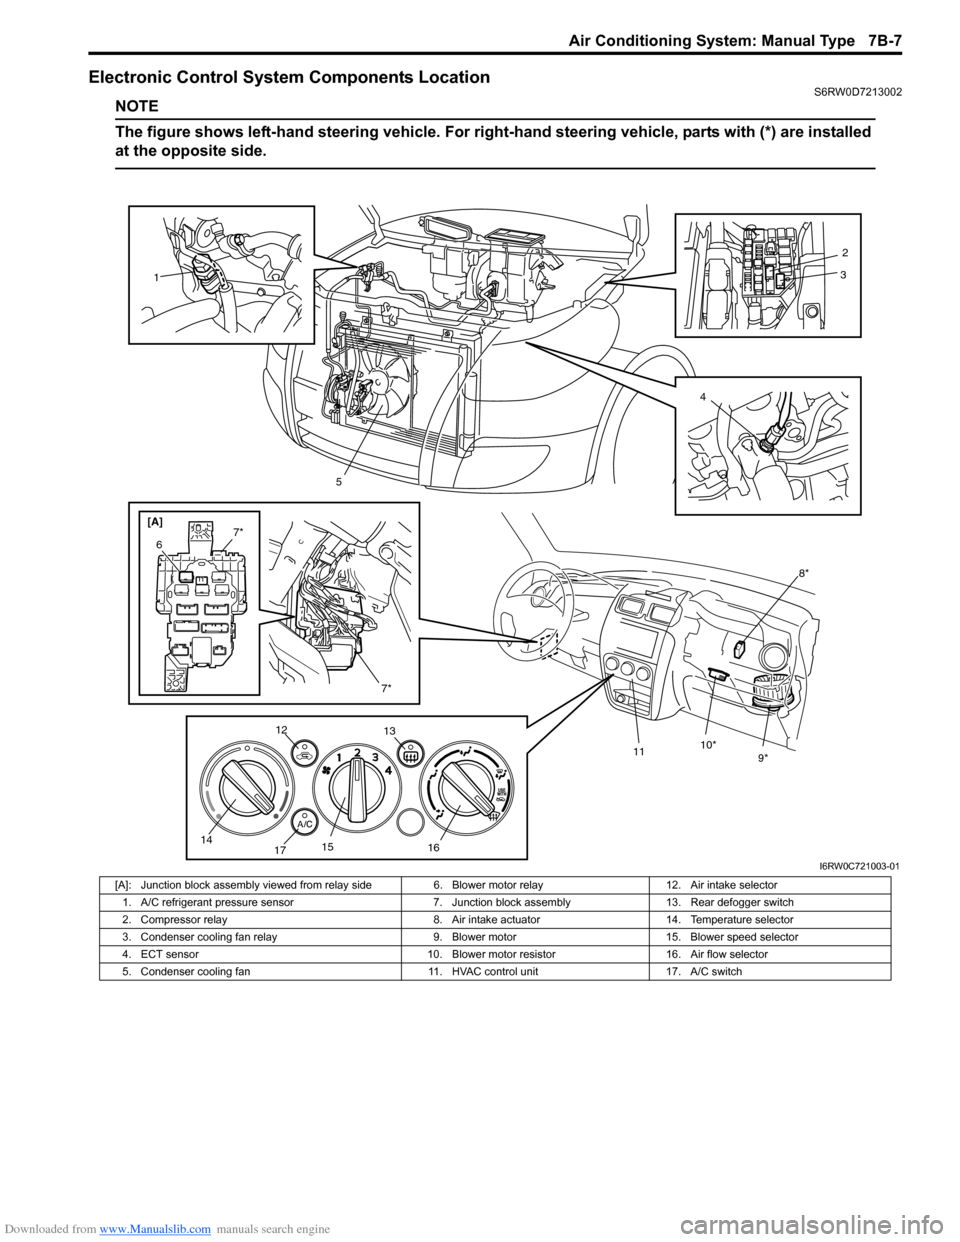 SUZUKI SX4 2006 1.G Service Workshop Manual Downloaded from www.Manualslib.com manuals search engine Air Conditioning System: Manual Type 7B-7
Electronic Control System Components LocationS6RW0D7213002
NOTE
The figure shows left-hand steering v